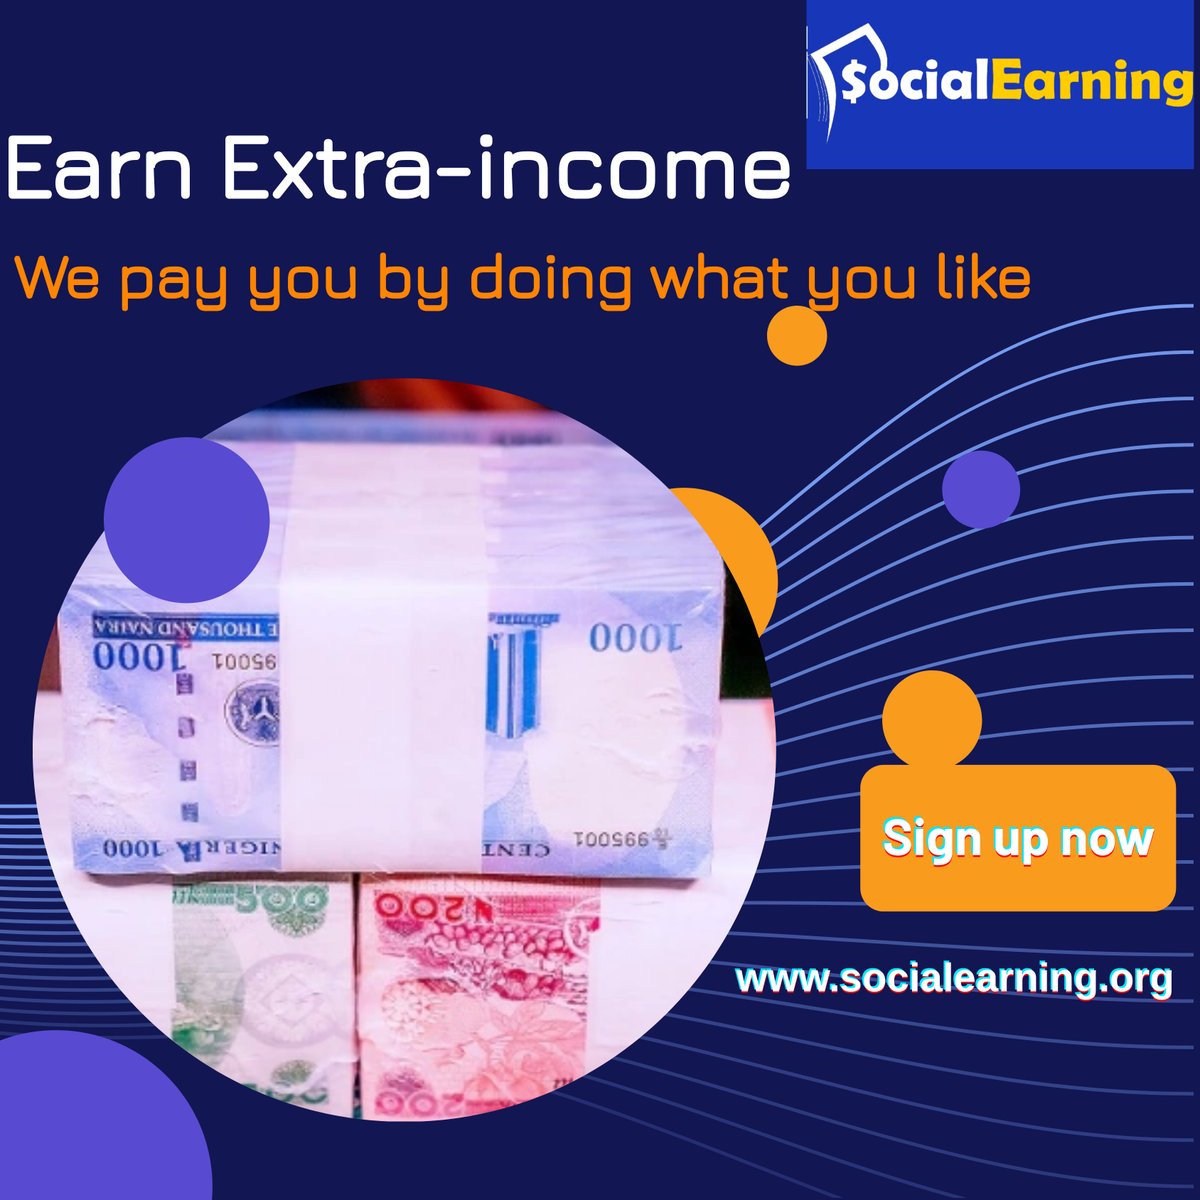 Earn extra-income on our website by performing simple tasks. we pay you on what you like doing. #novar #Enugu #GodDid #socialearning